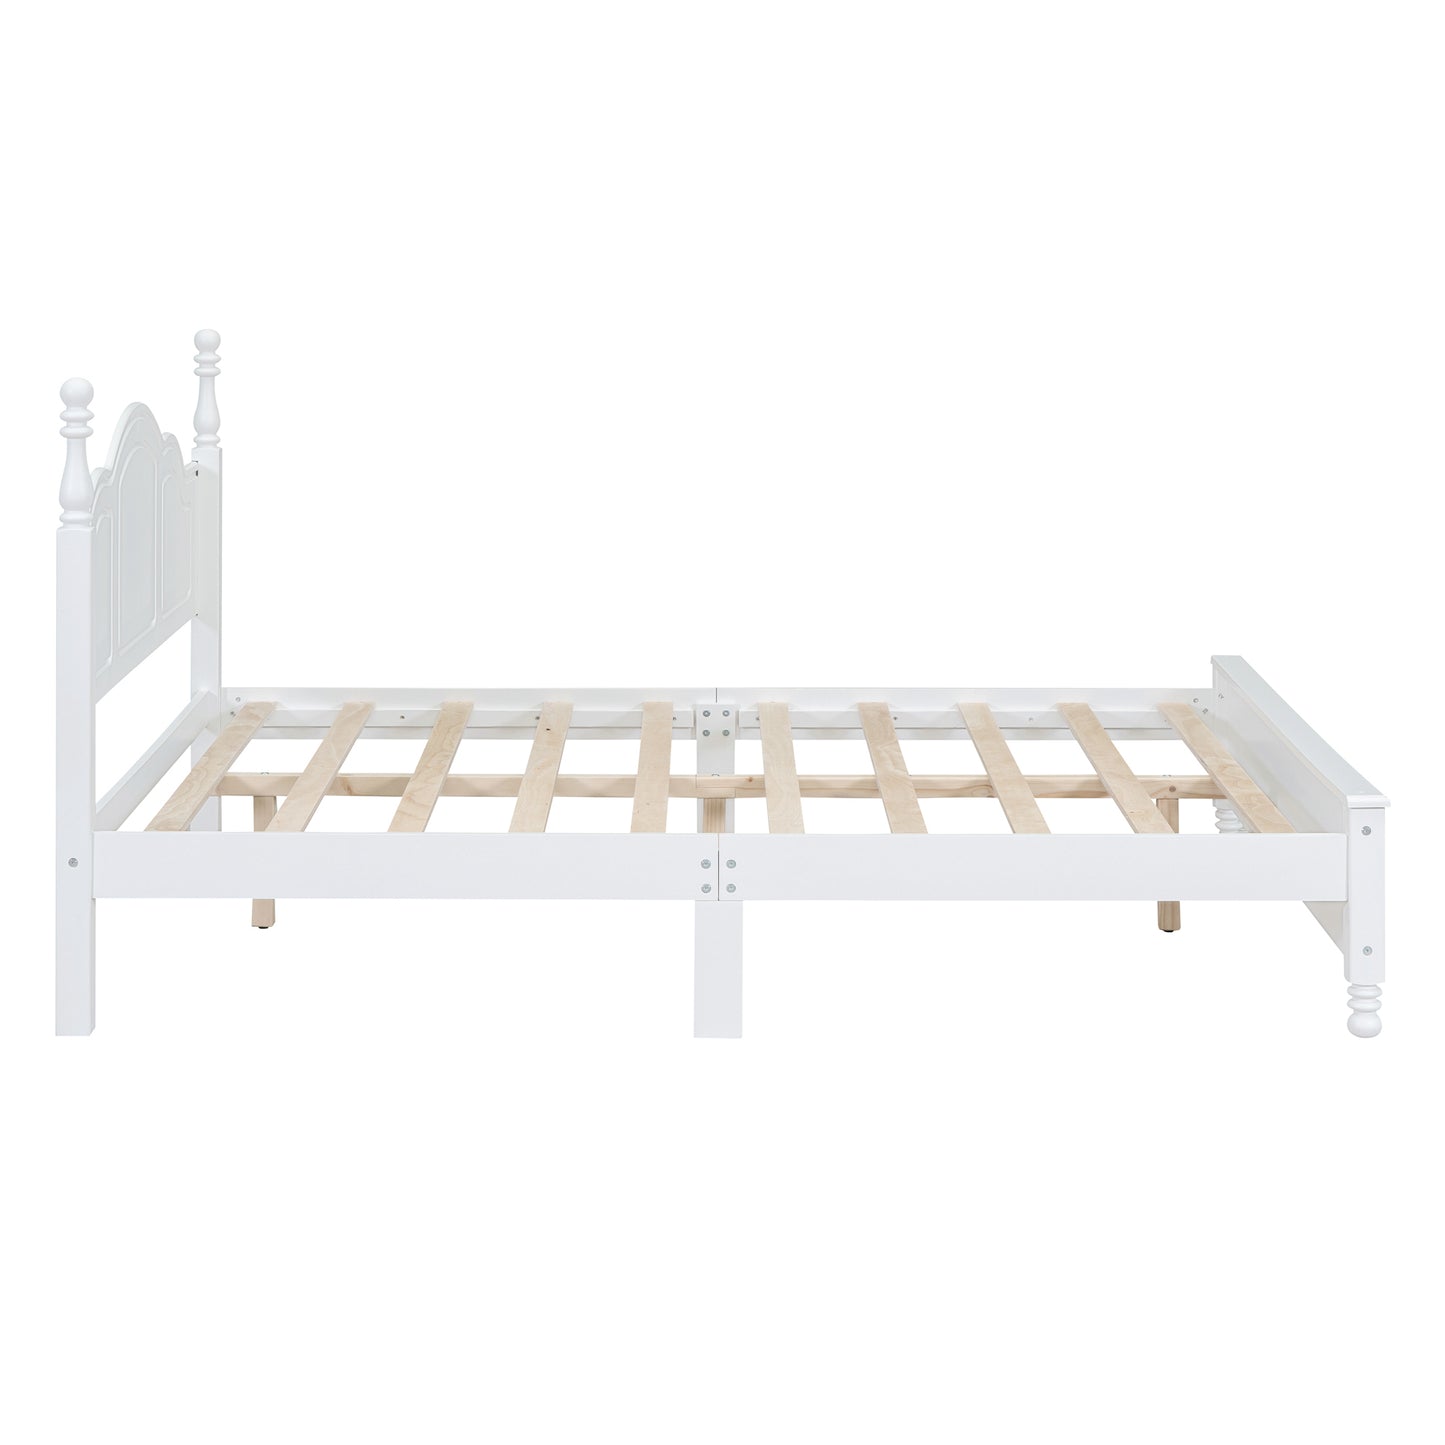 Queen Size Wood Platform Bed Frame,Retro Style Platform Bed with Wooden Slat Support,White